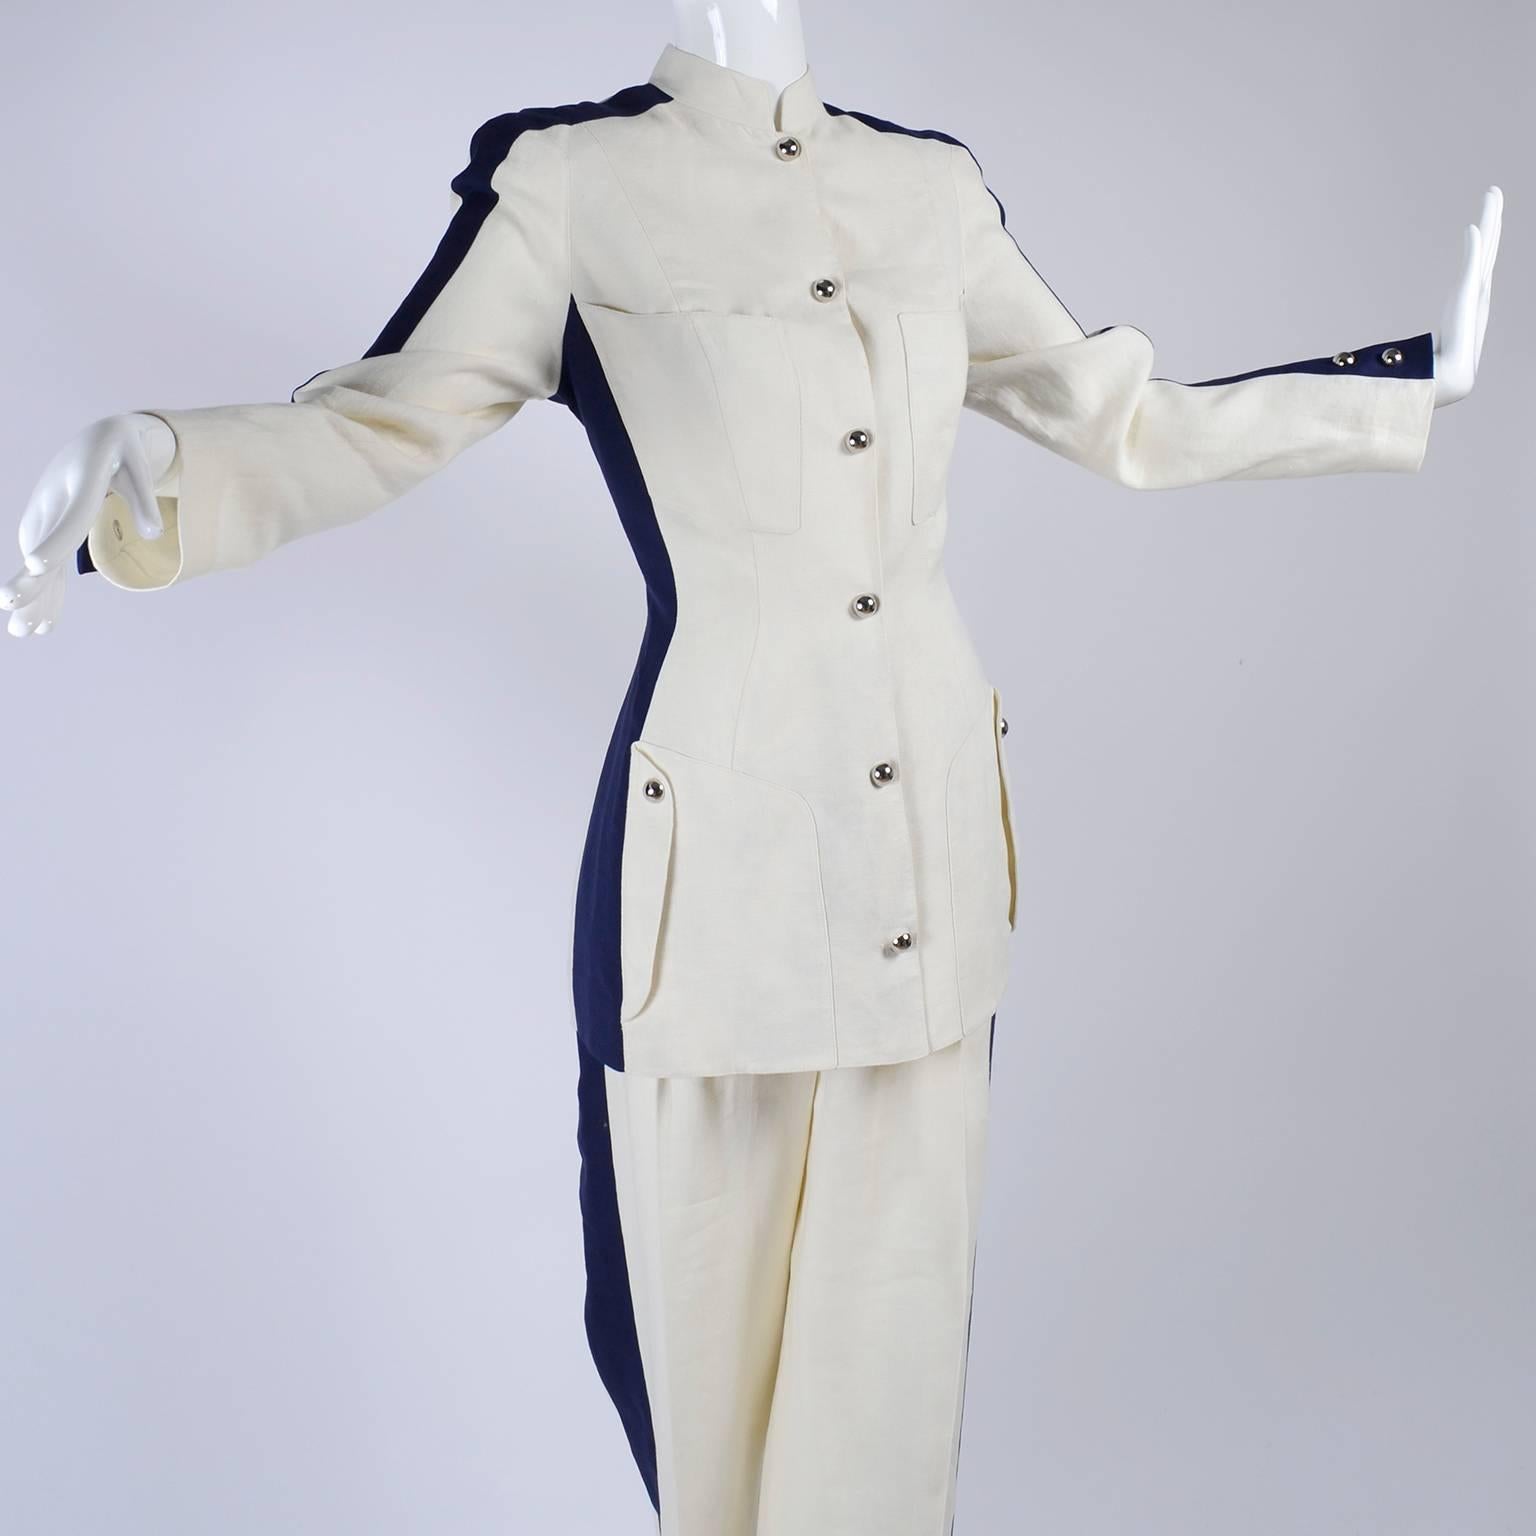 Women's Thierry Mugler Vintage Pants Suit W Side Stripes Jacket & High Waist Trousers